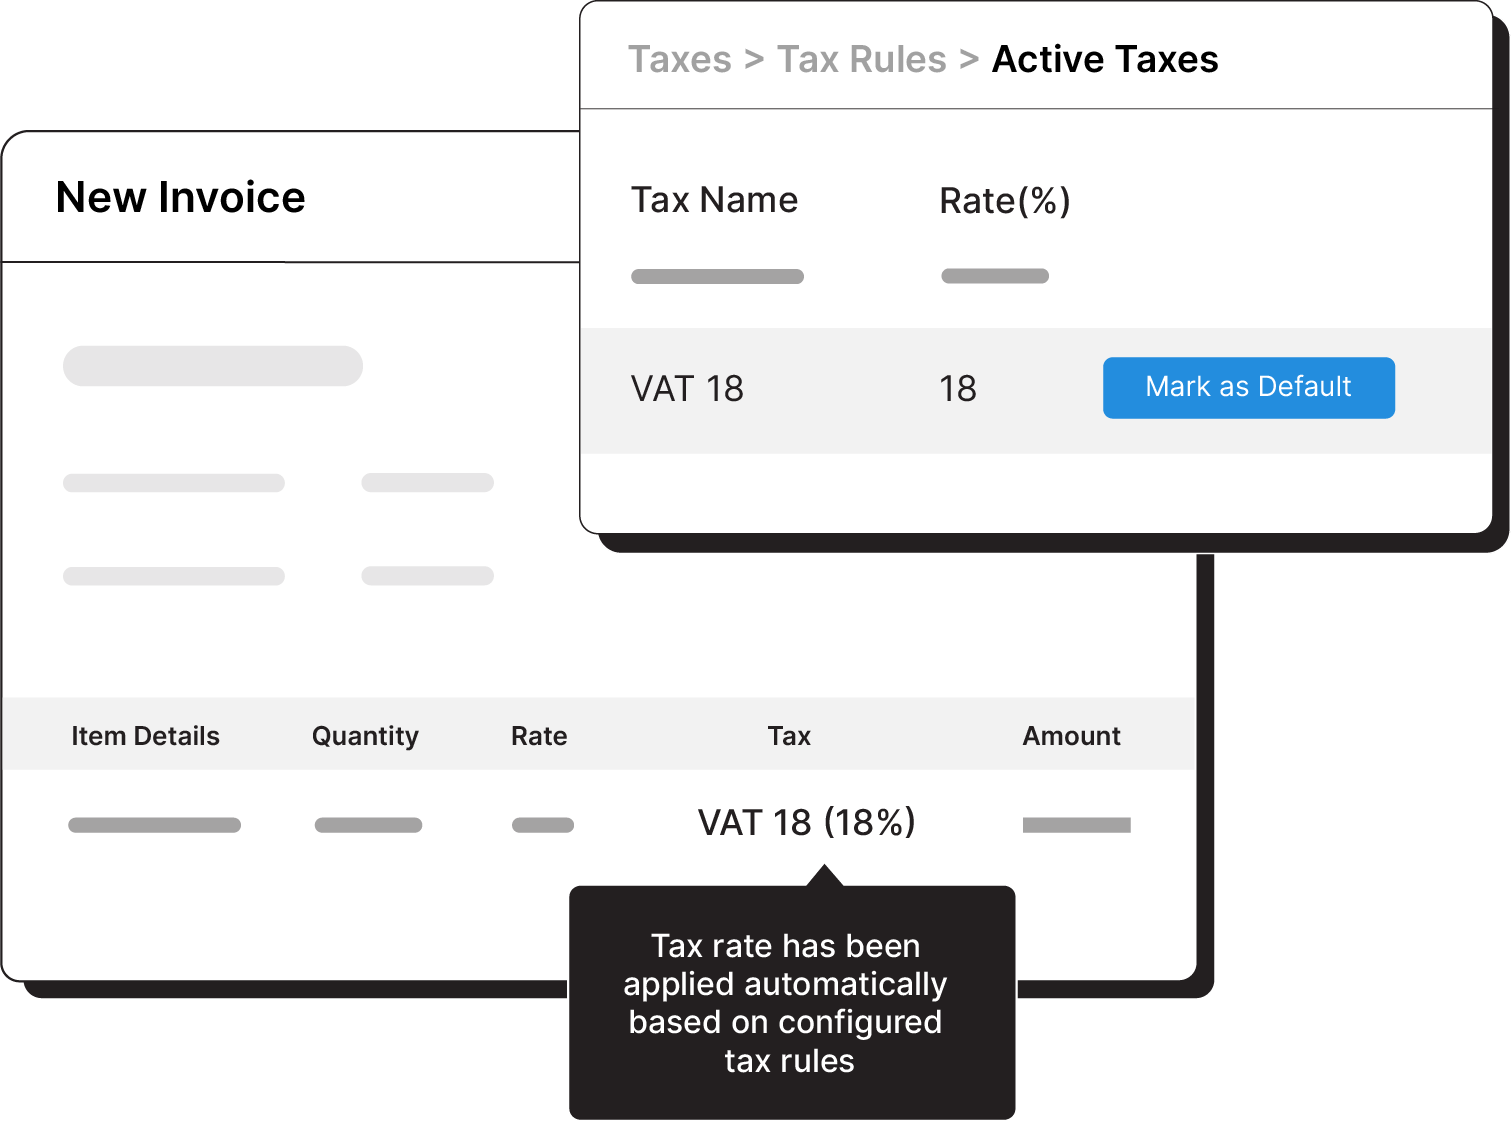 Set default tax for your organization - Global edition